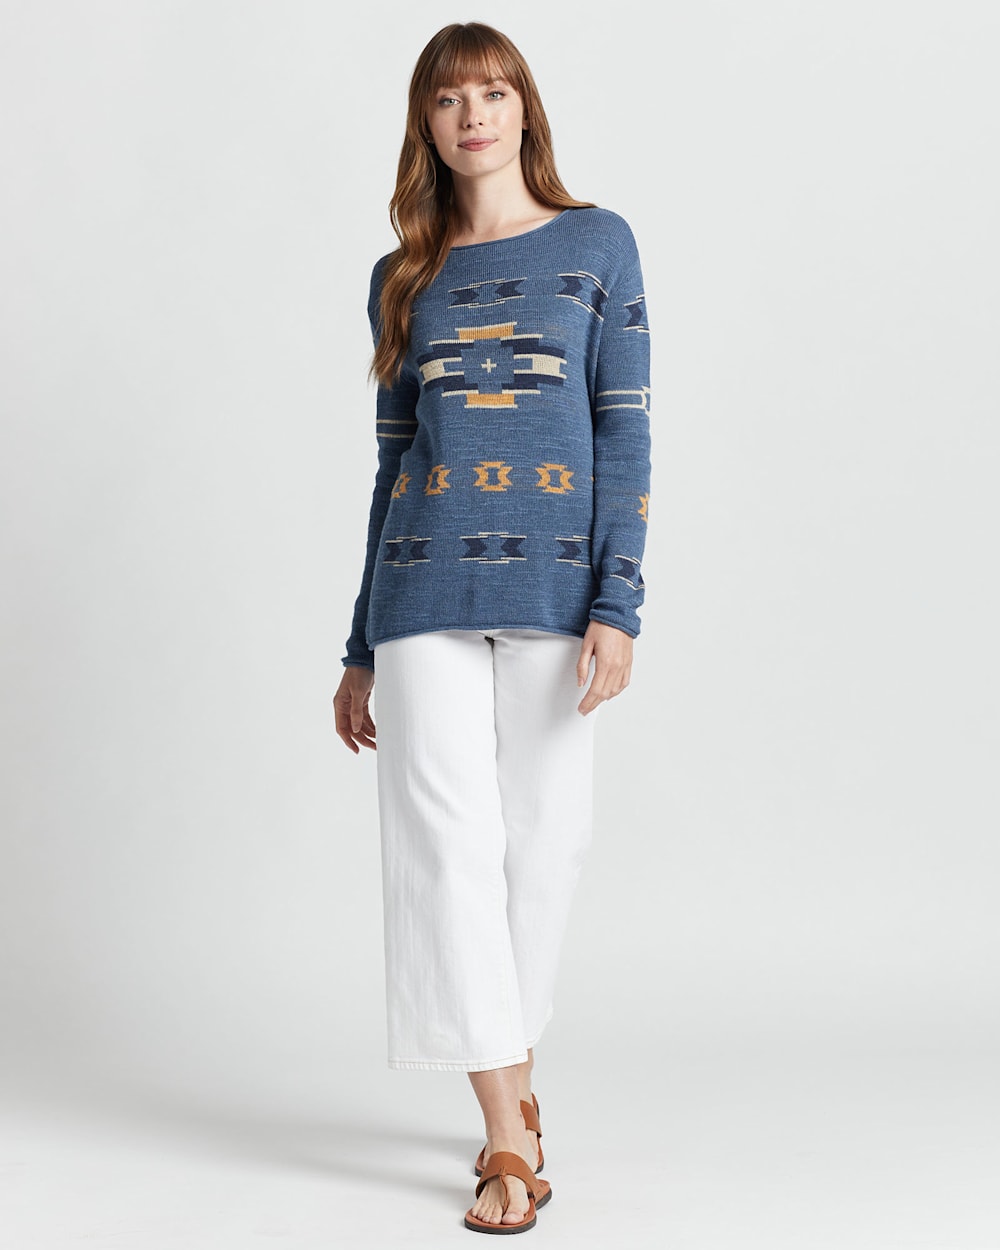 WOMEN'S LONG-SLEEVE GRAPHIC PULLOVER IN BLUE DENIM MULTI image number 1